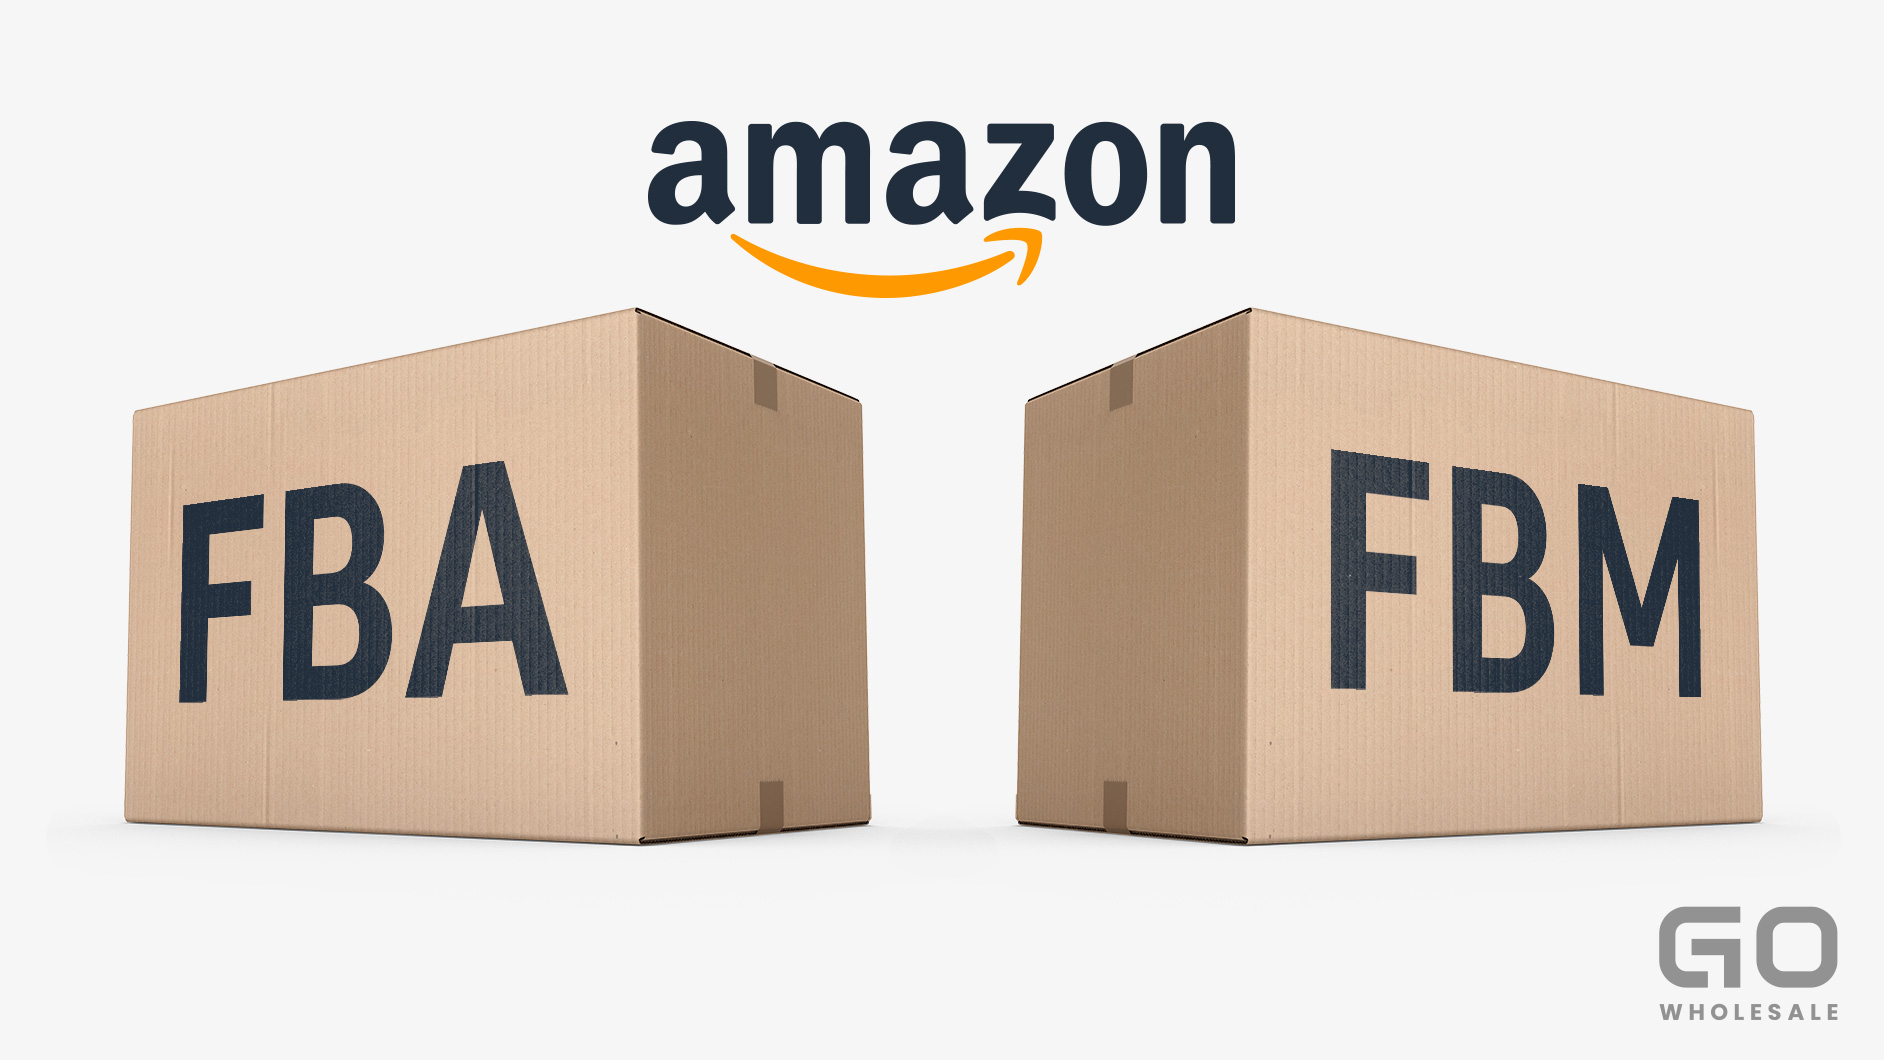 Amazon FBA or FBM - Which is Better for Your Business?